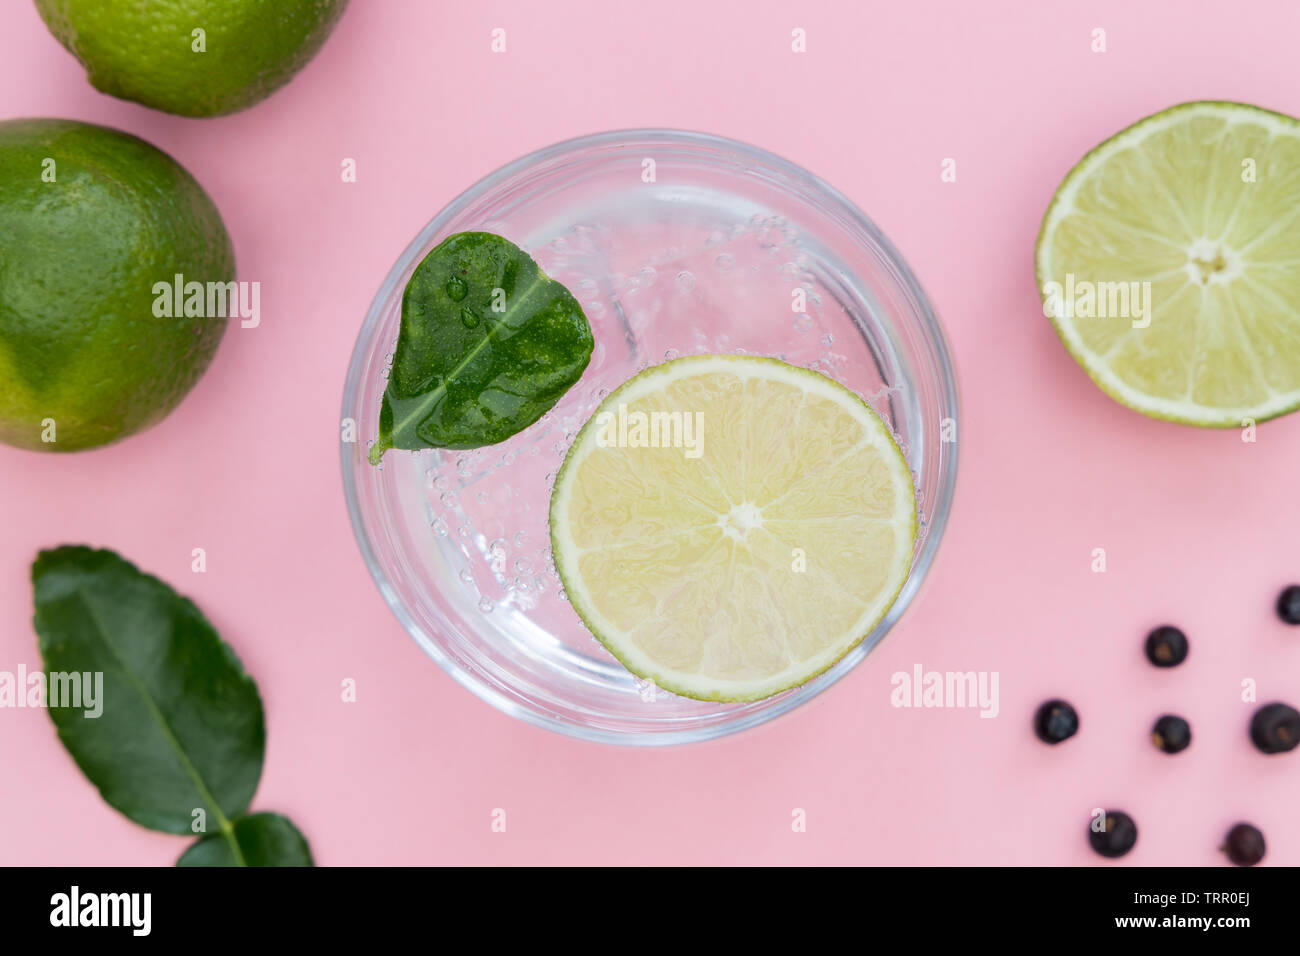 Gin tonic cocktail drink in glass on summer pink background Stock Photo